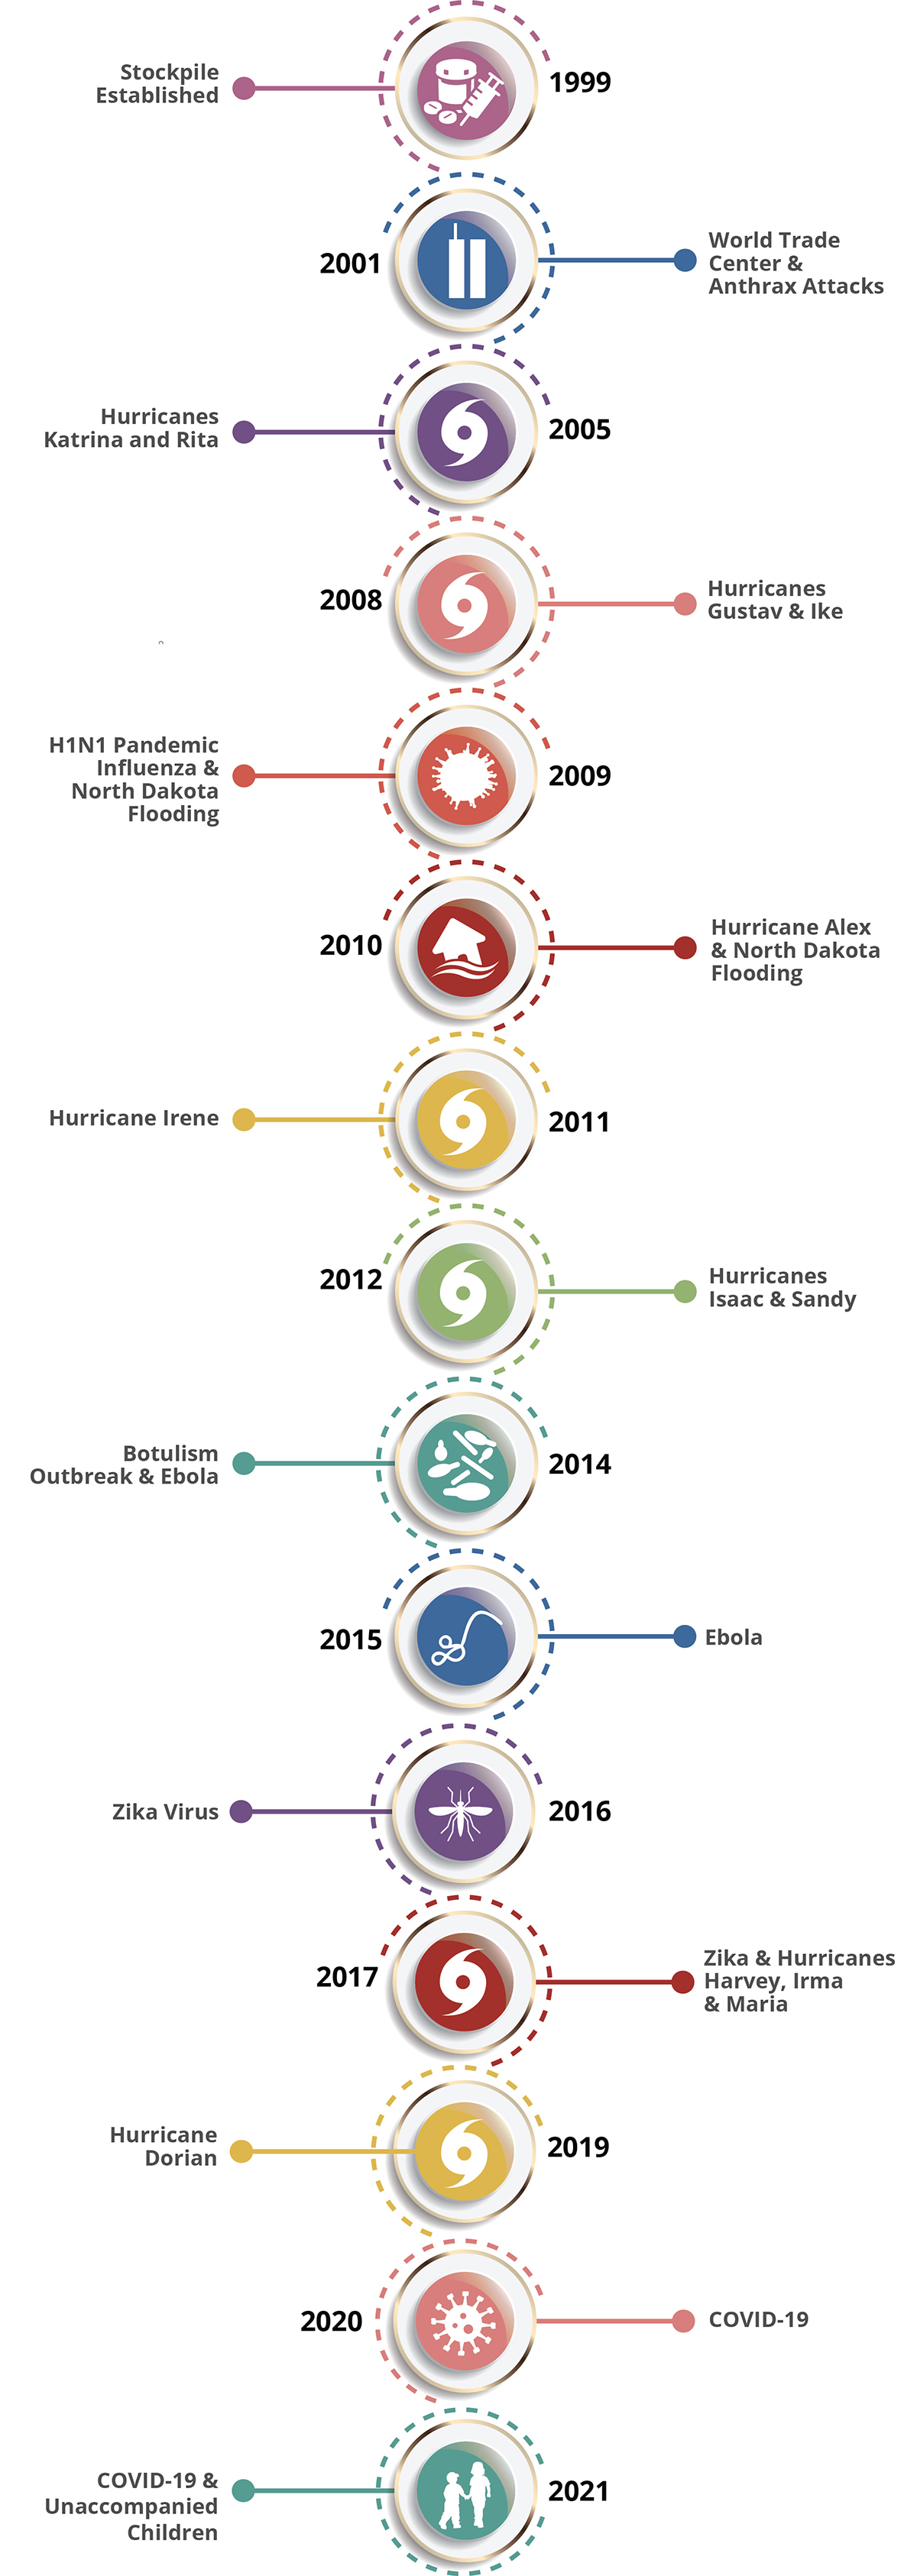 Timeline of CDC stockpile responses.  Contents of this graphic are described in the text below.